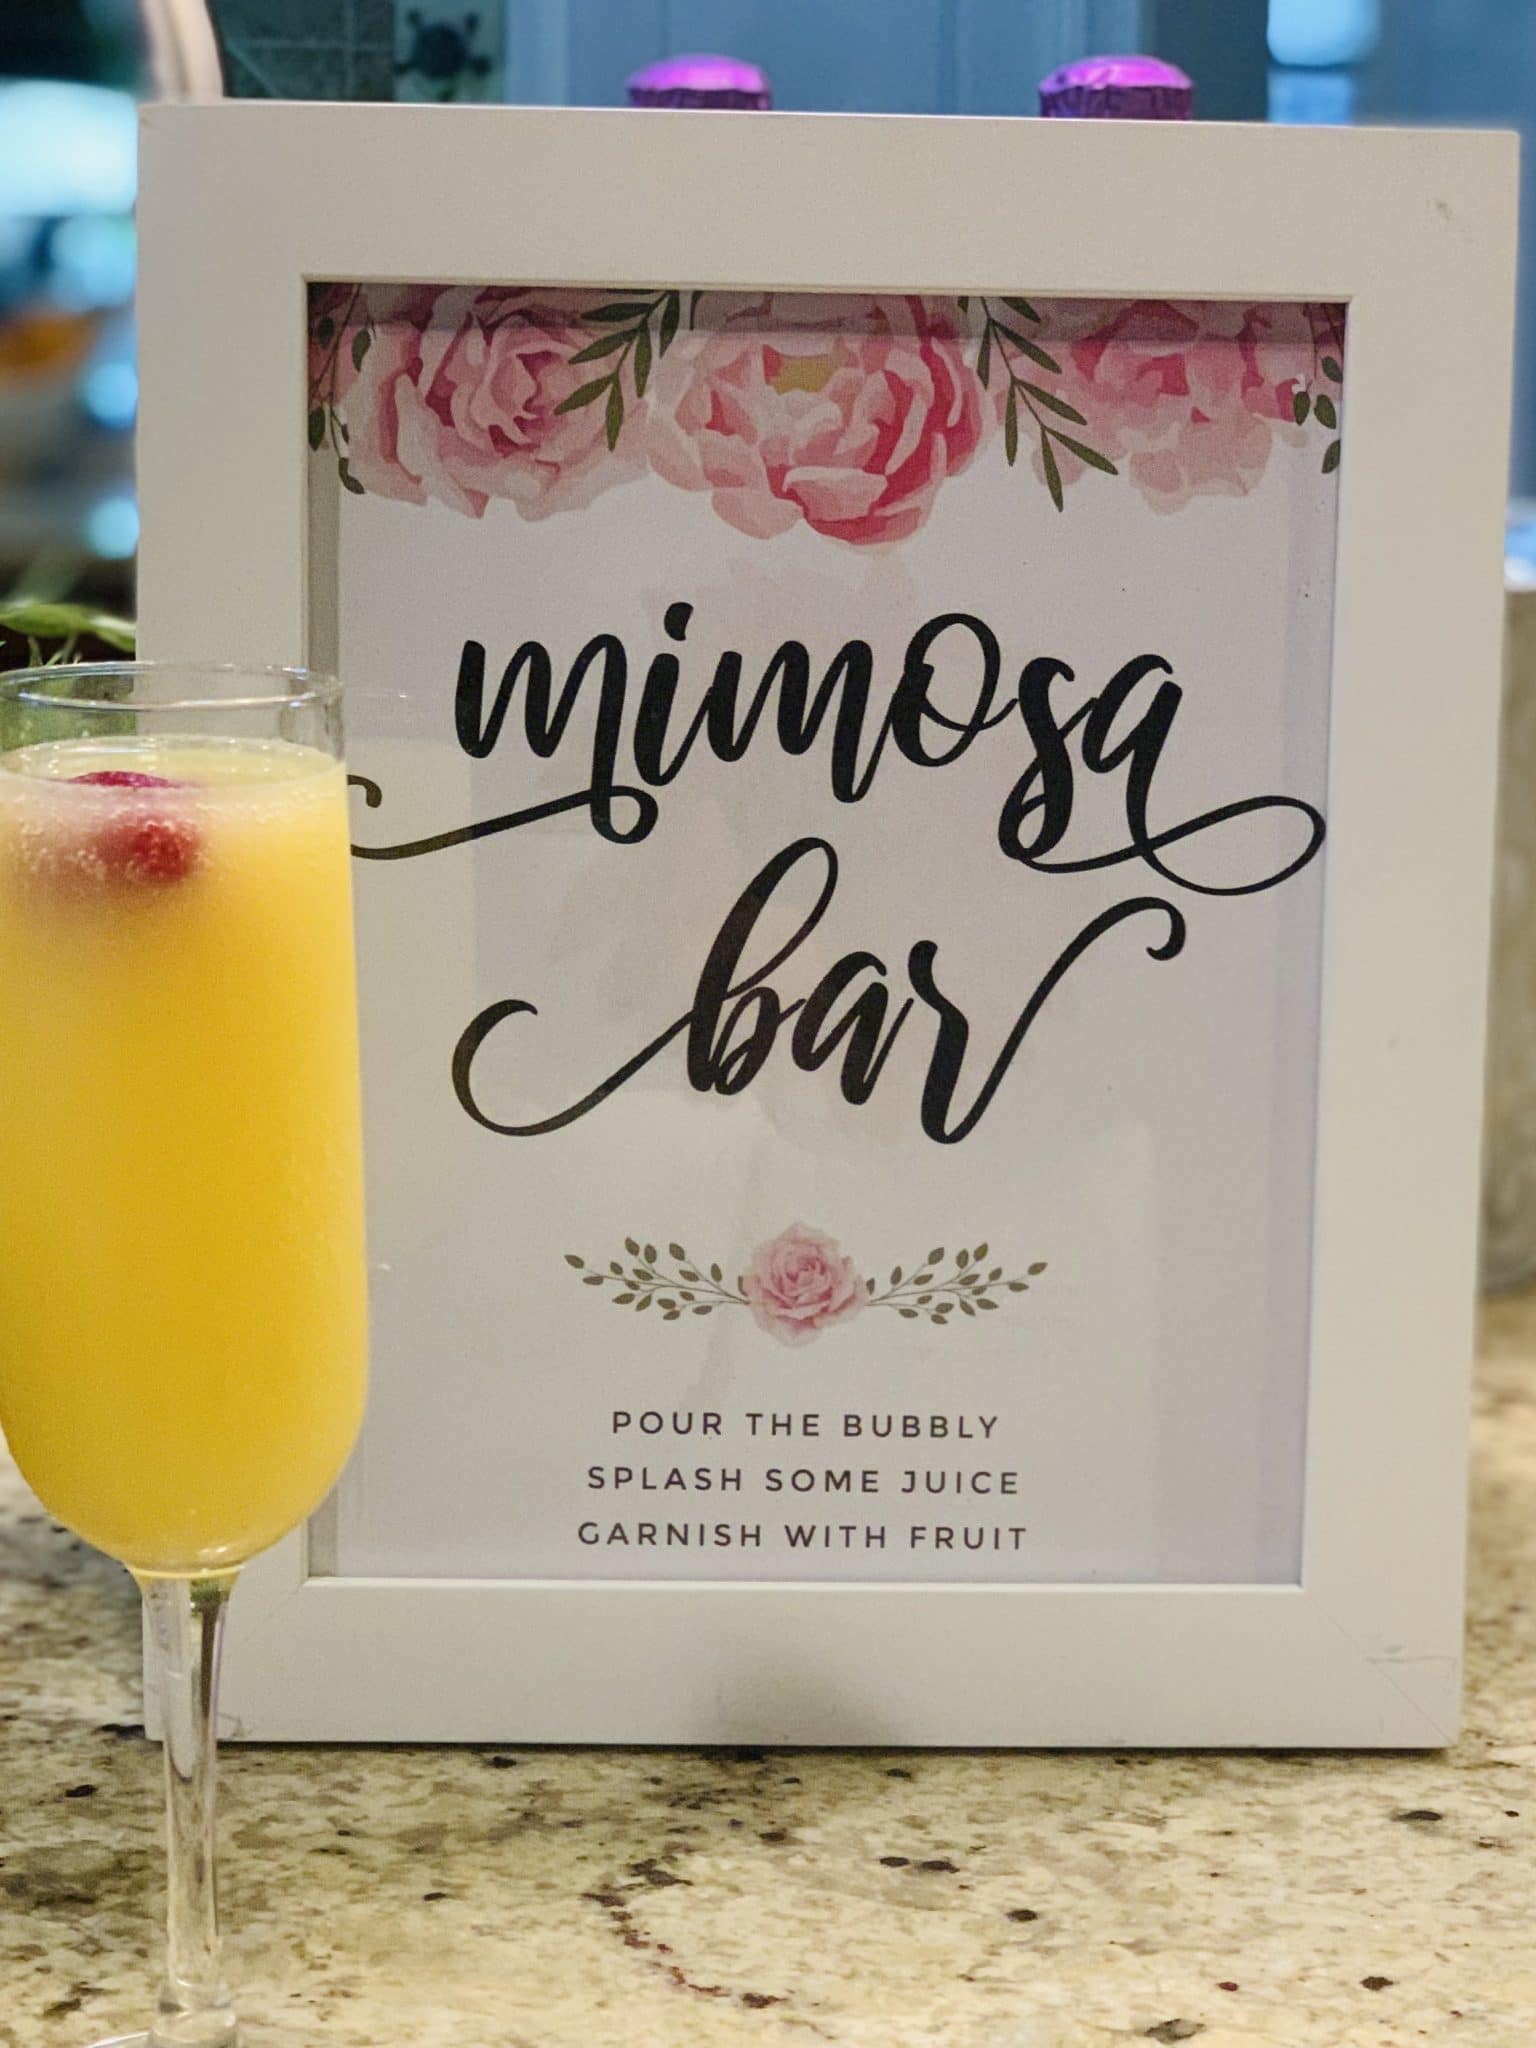 https://tulamama.com/wp-content/uploads/2020/02/Mimosa-bar-labels-sign-printables-free-scaled.jpg